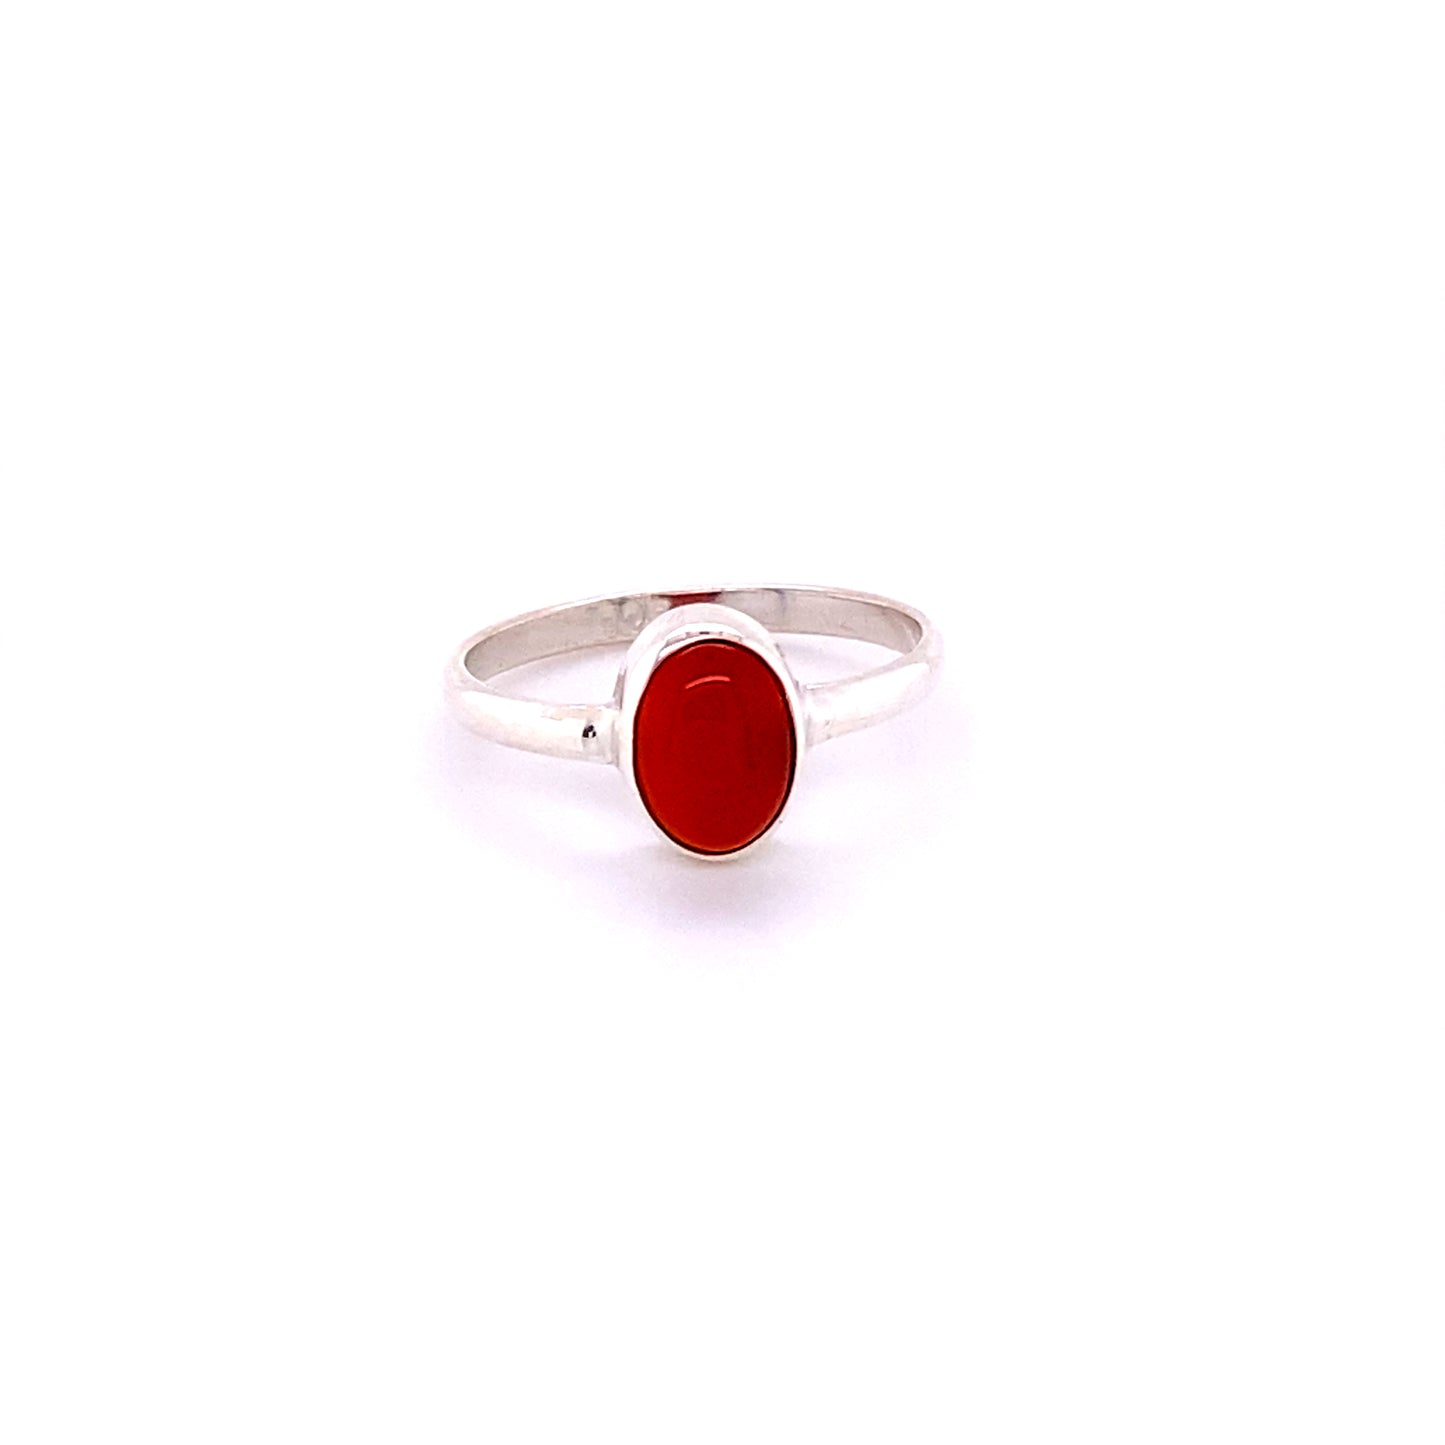 Simple Oval Natural Gemstone Ring with a bright red oval gemstone, centered and displayed on a white background.